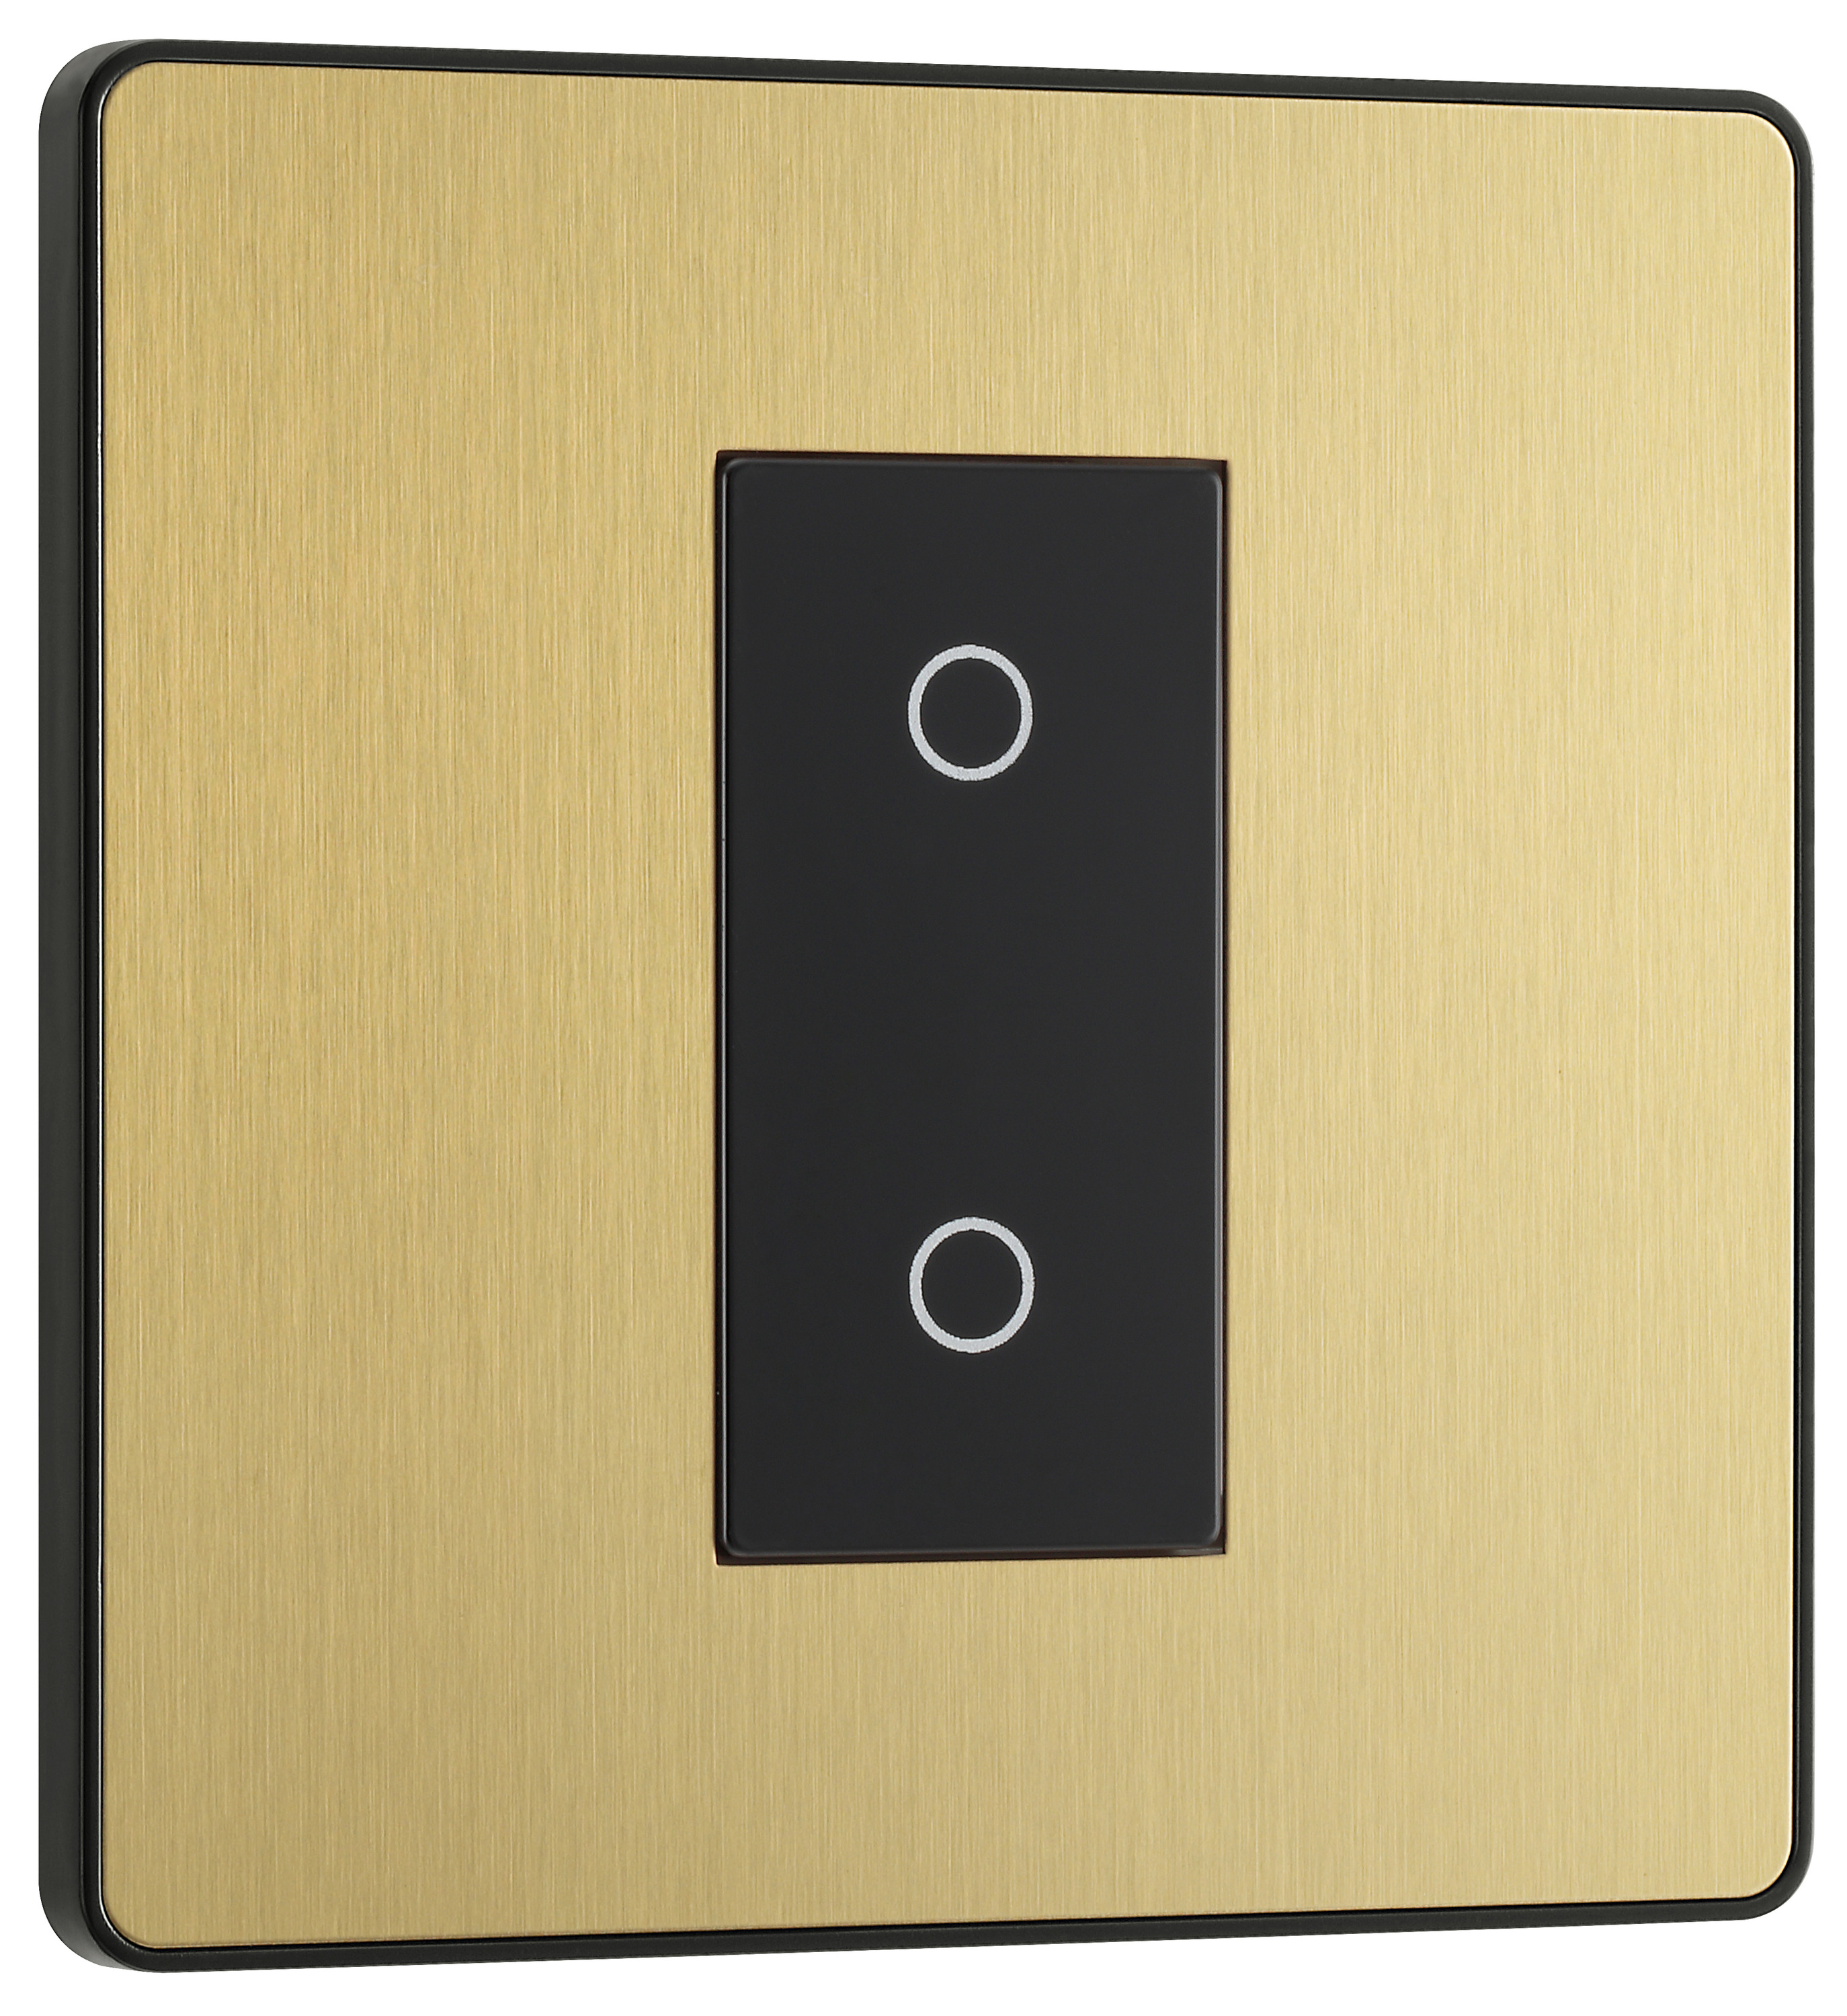 Image of BG Evolve Master Brushed Brass 2 Way Single Touch Dimmer Switch - 200W